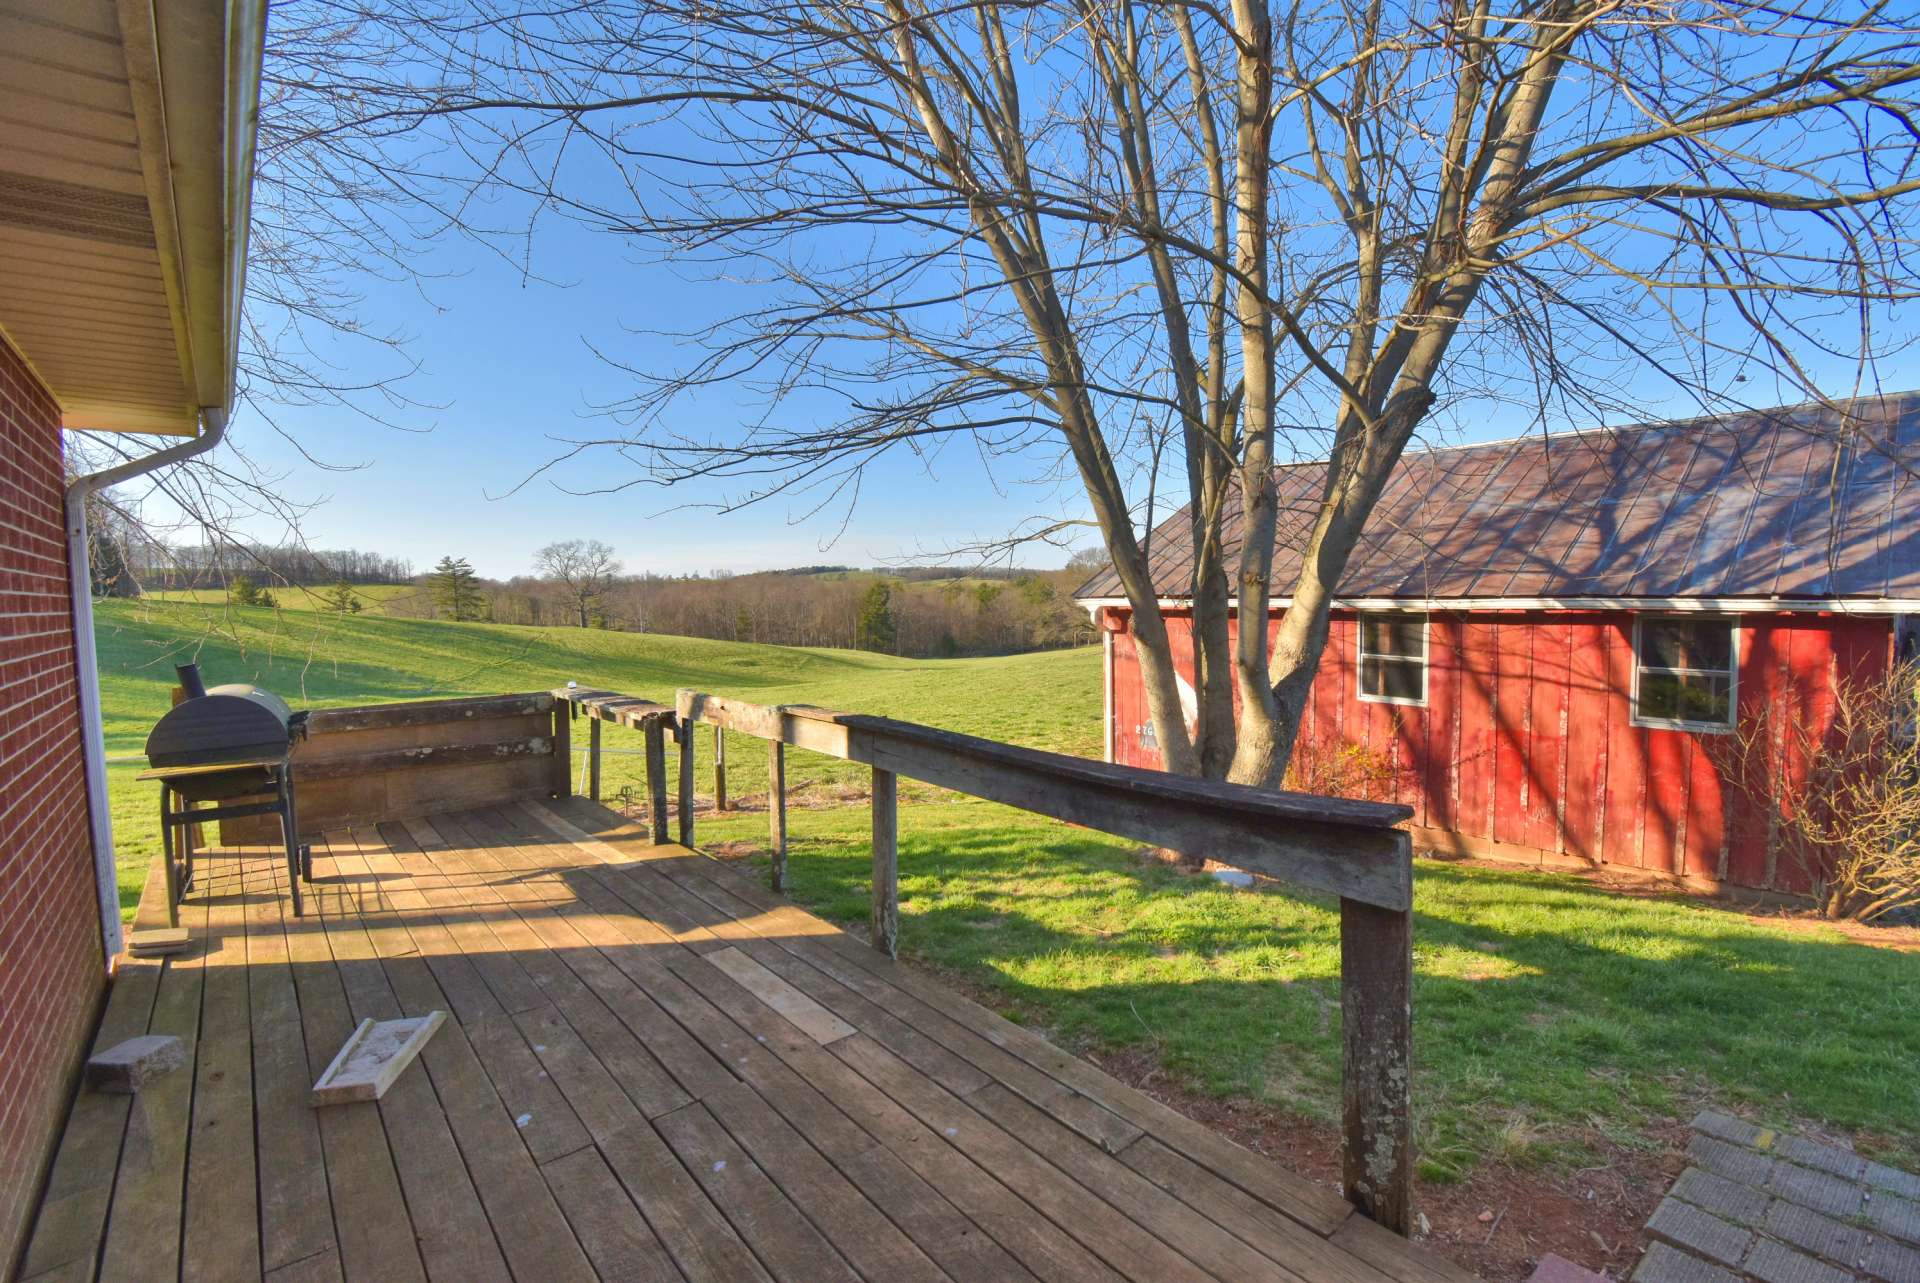 In need of some TLC, the back deck overlooks pastures, barns, and views.